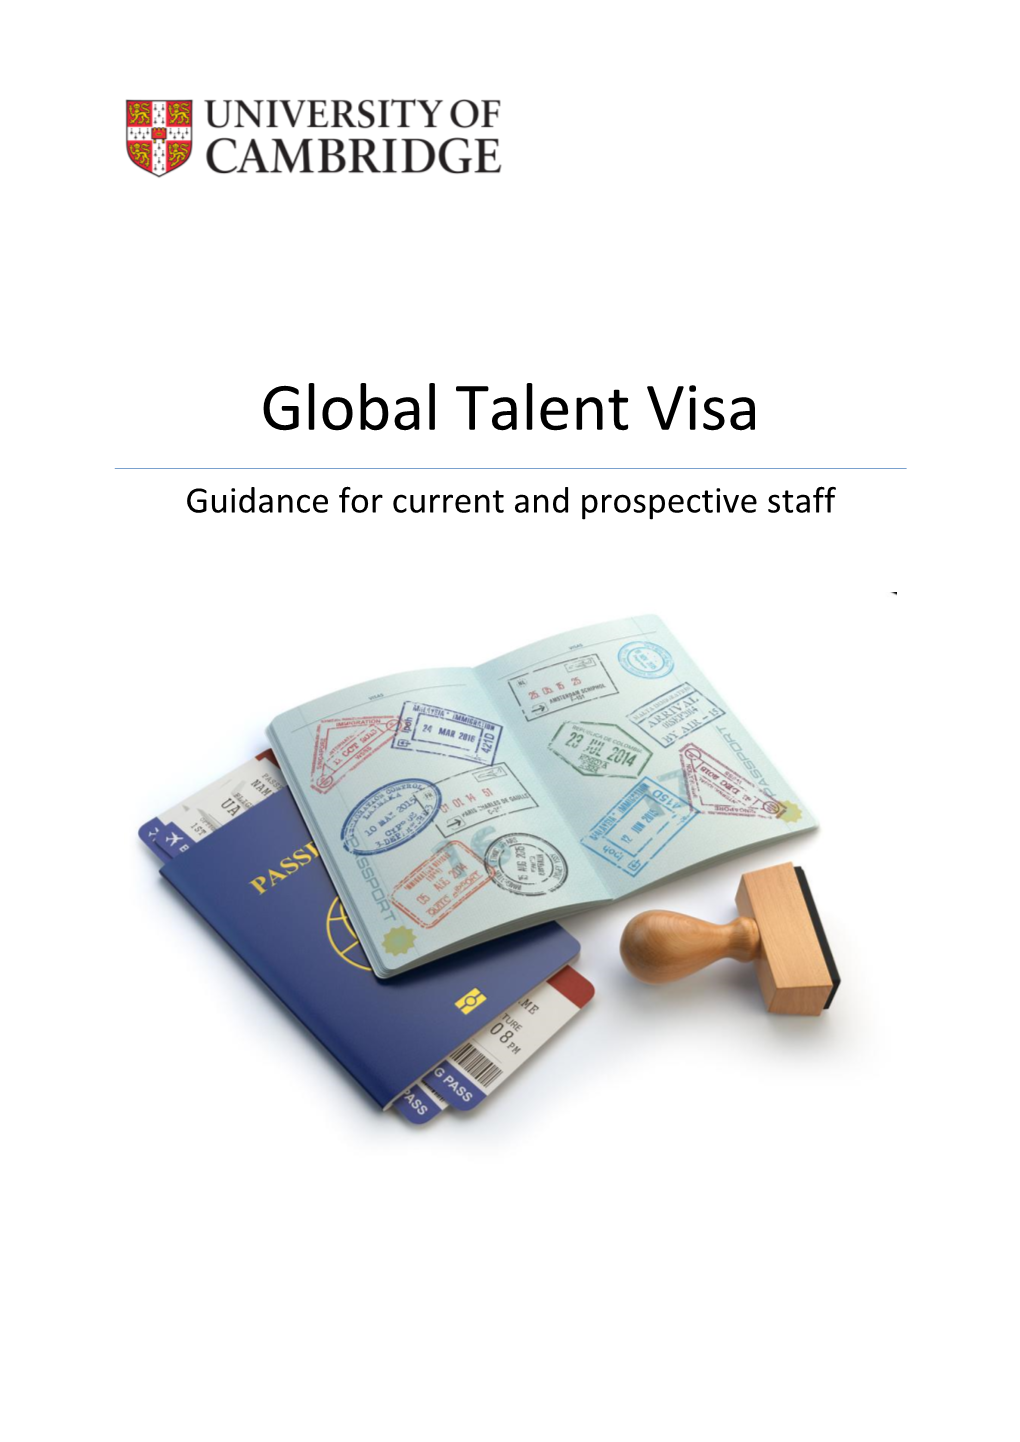 Global Talent Visa Guidance for Current and Prospective Staff